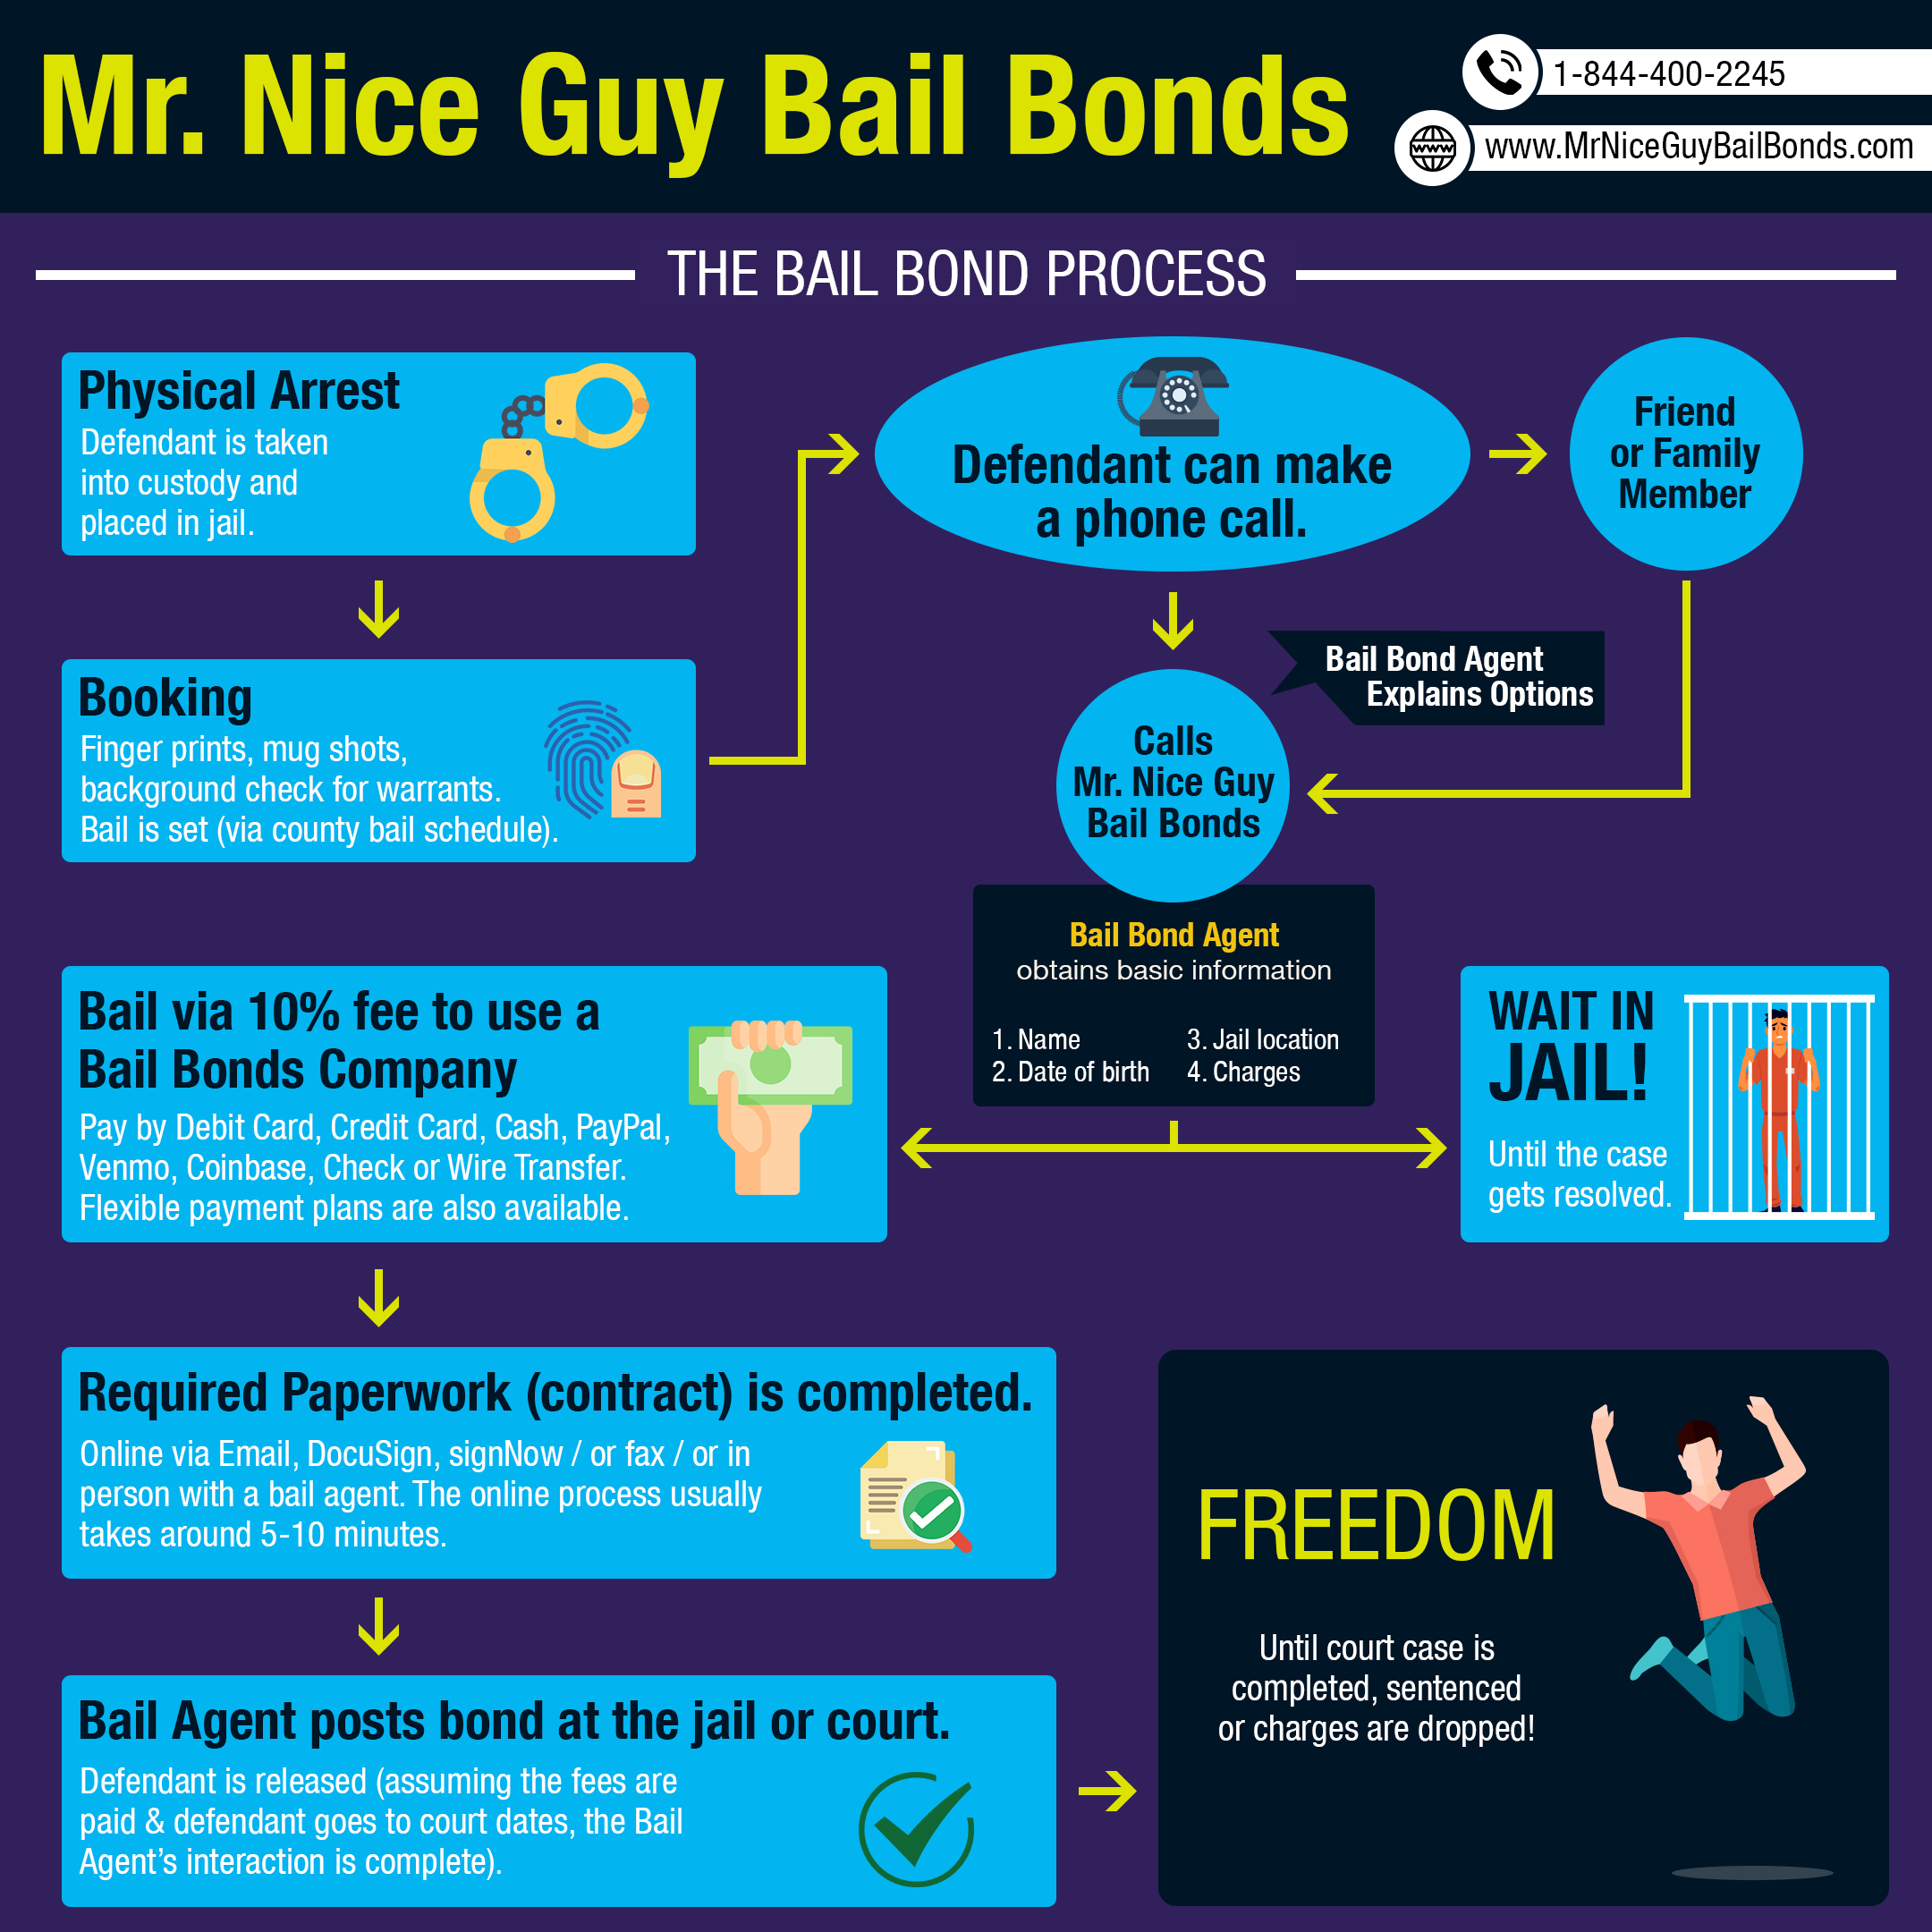 The bail bond process explained in 9 steps